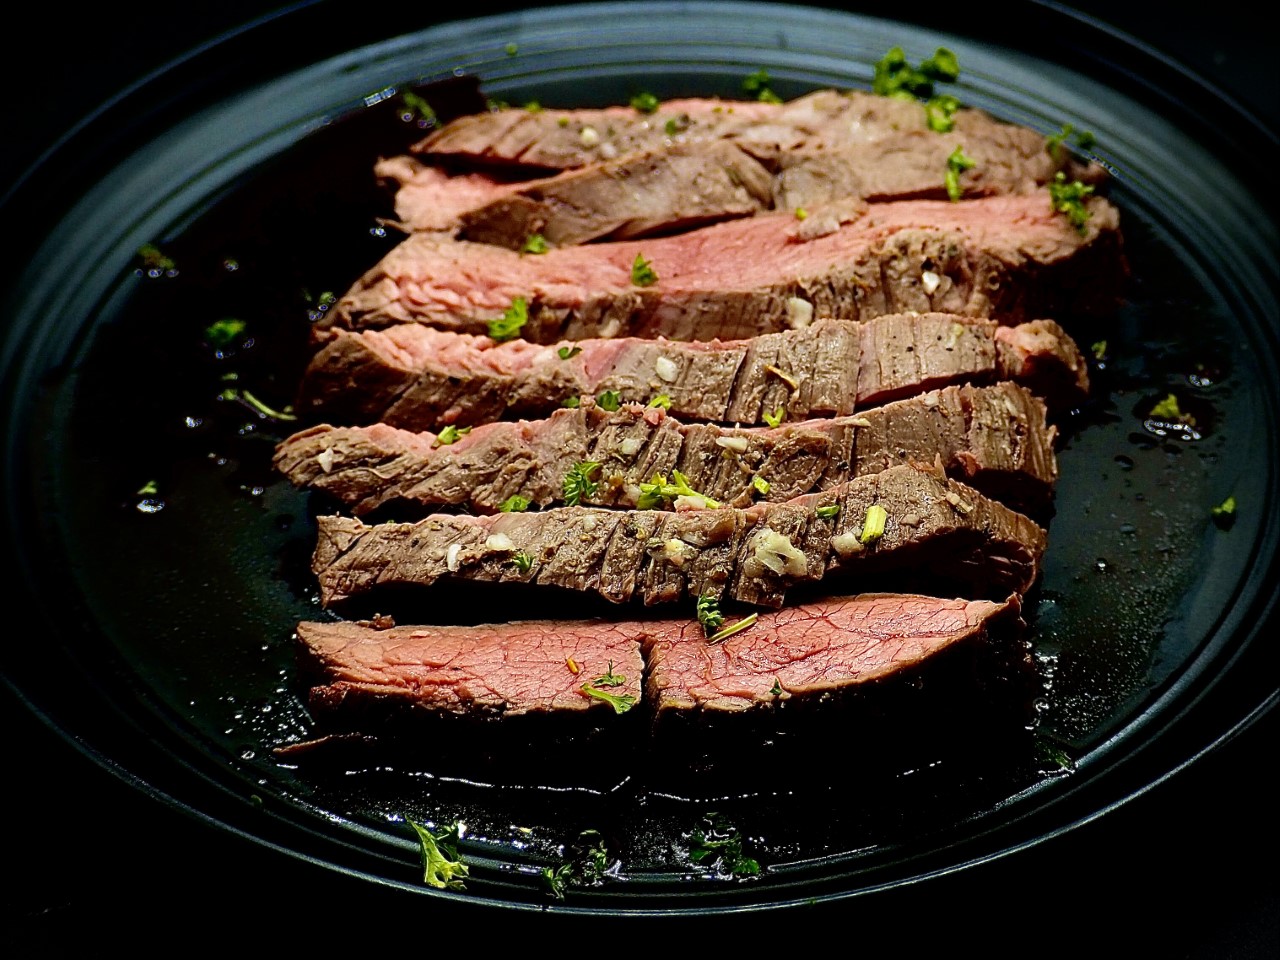 How to Broil Flank Steak for Tender and Juicy Results – Garlic-Marinated Broiled Flank Steak